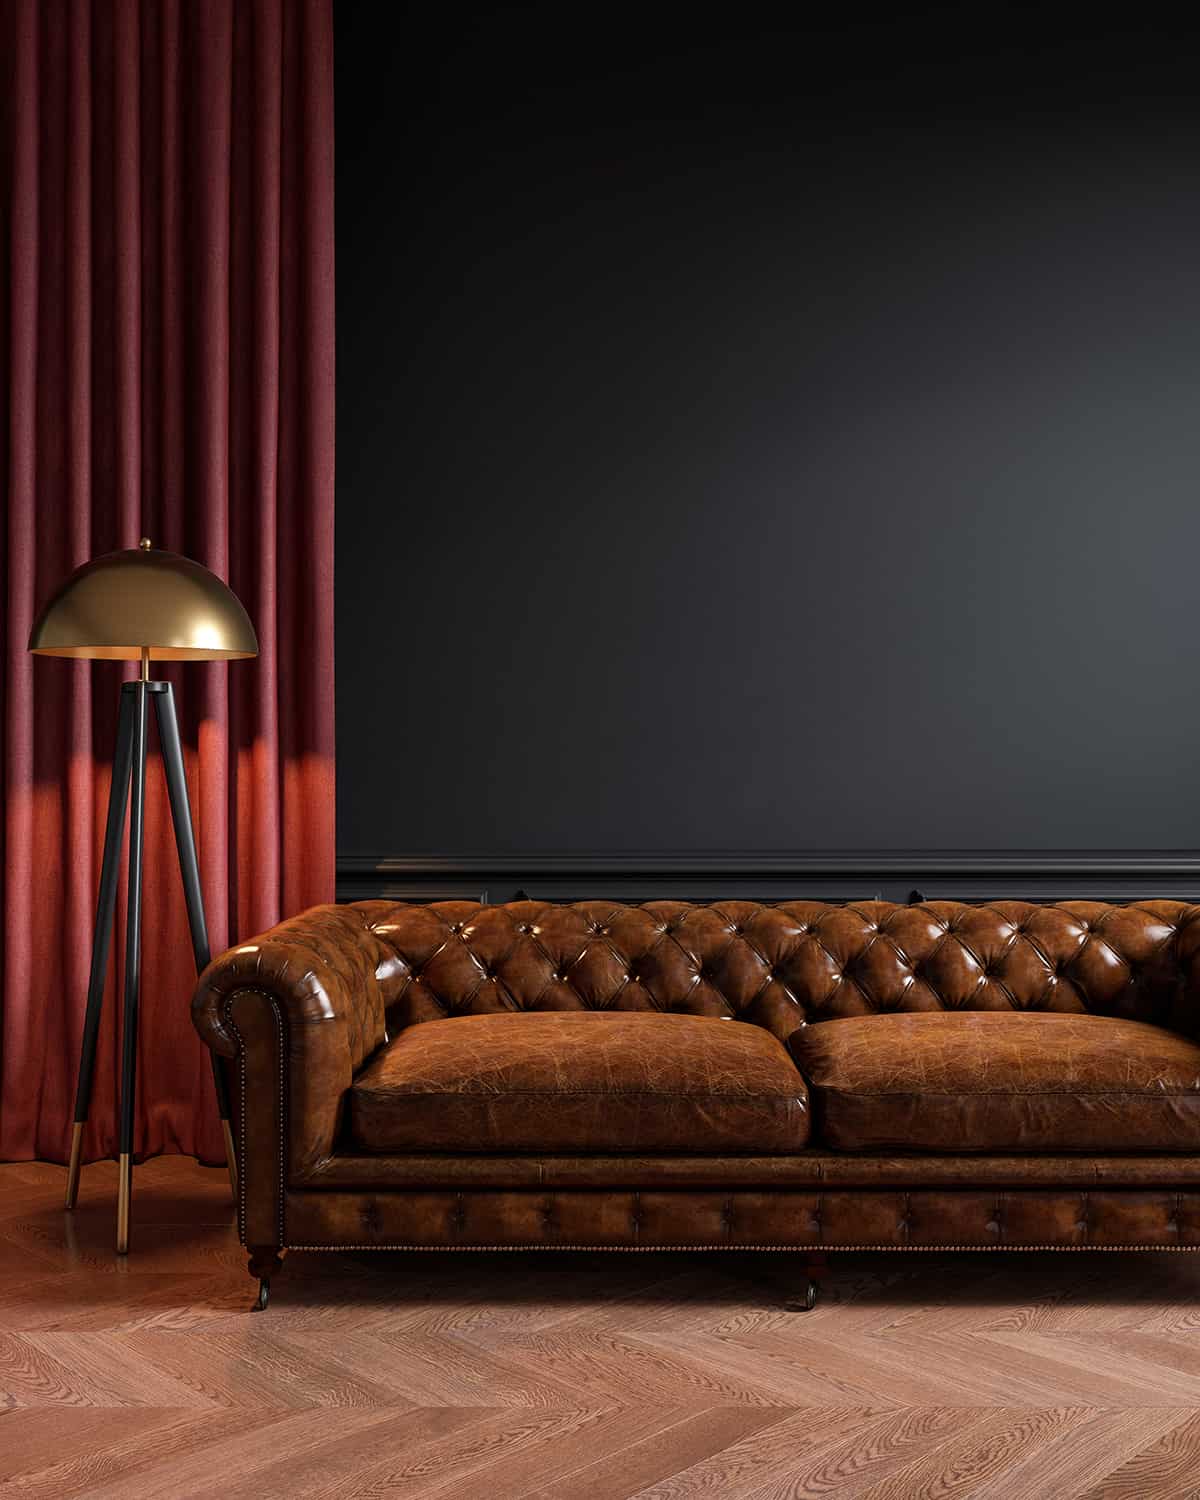 What Color Curtains Go With Brown Sofa, What Color Curtains Go With Dark Brown Couch